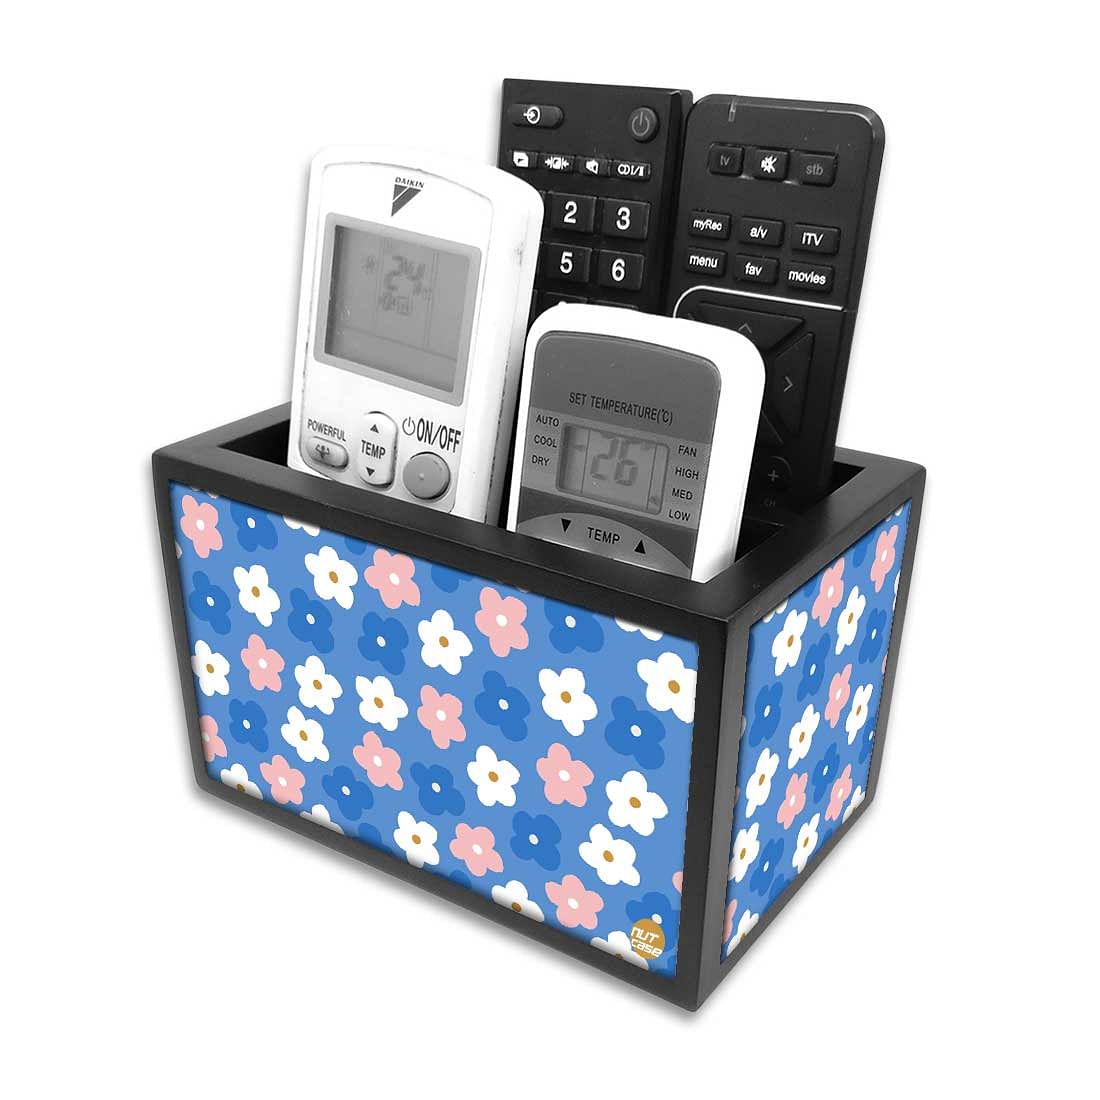 New Floral Remote Control Stand - Flowers Of Spring Nutcase